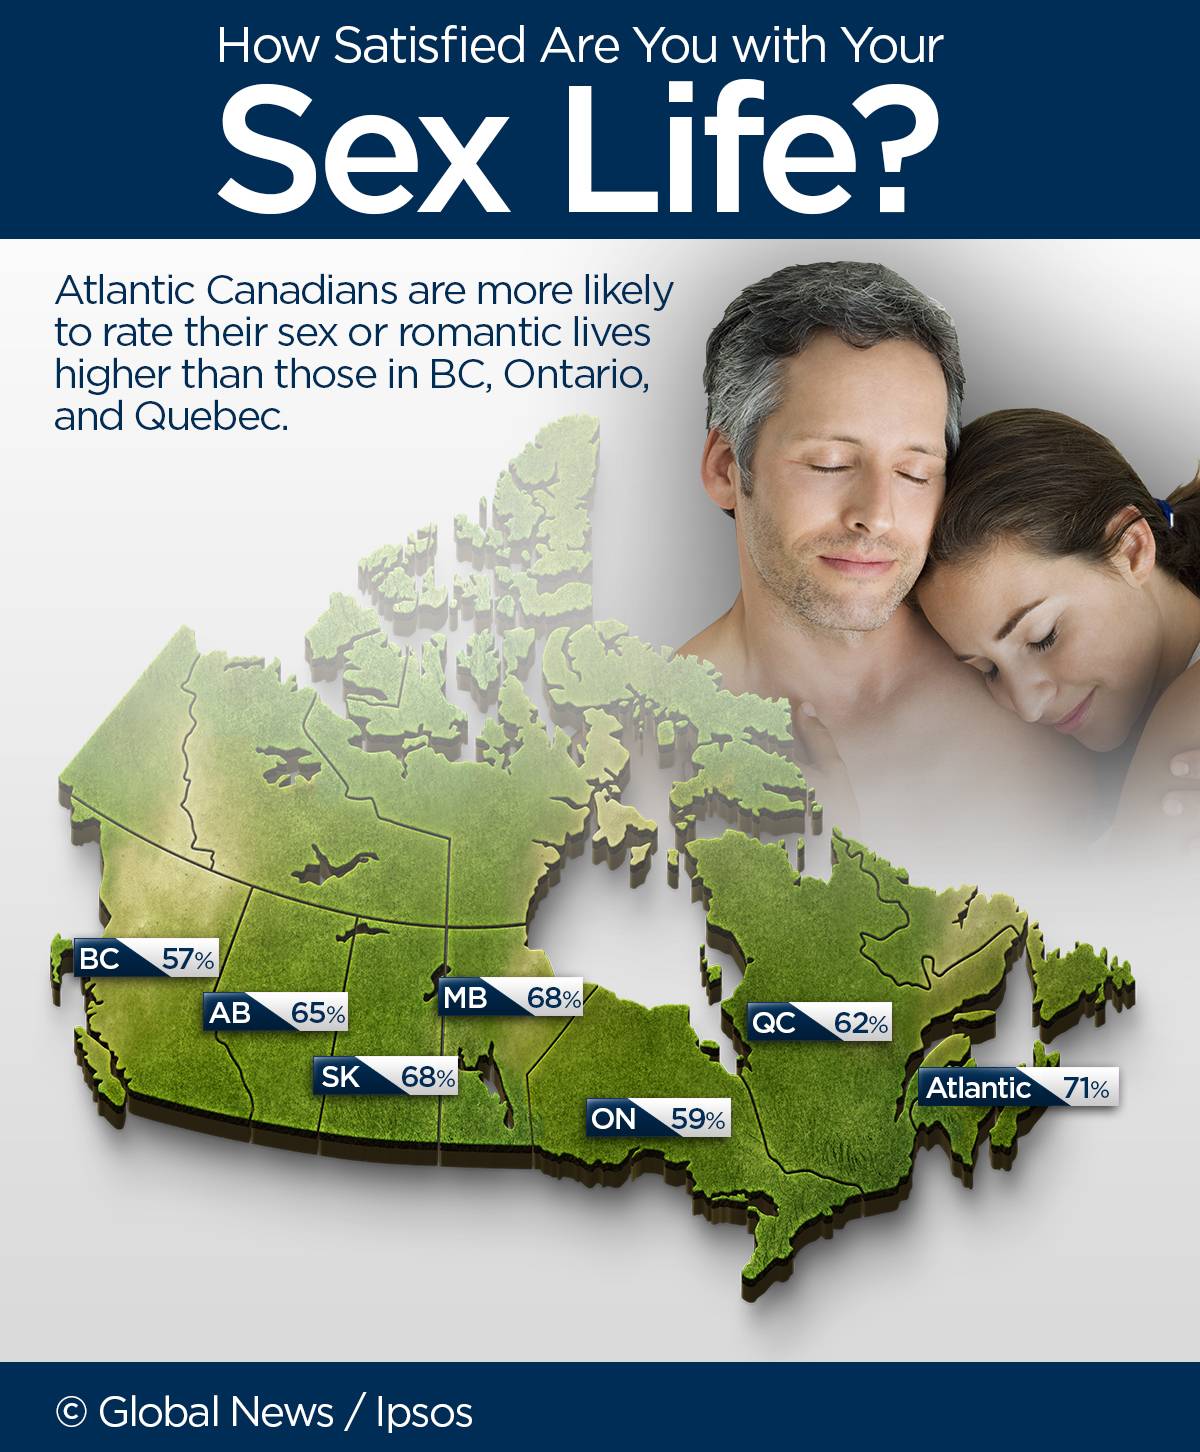 British Columbians are the Least Sexually Satisfied in Canada. What’s Up? Not Much!